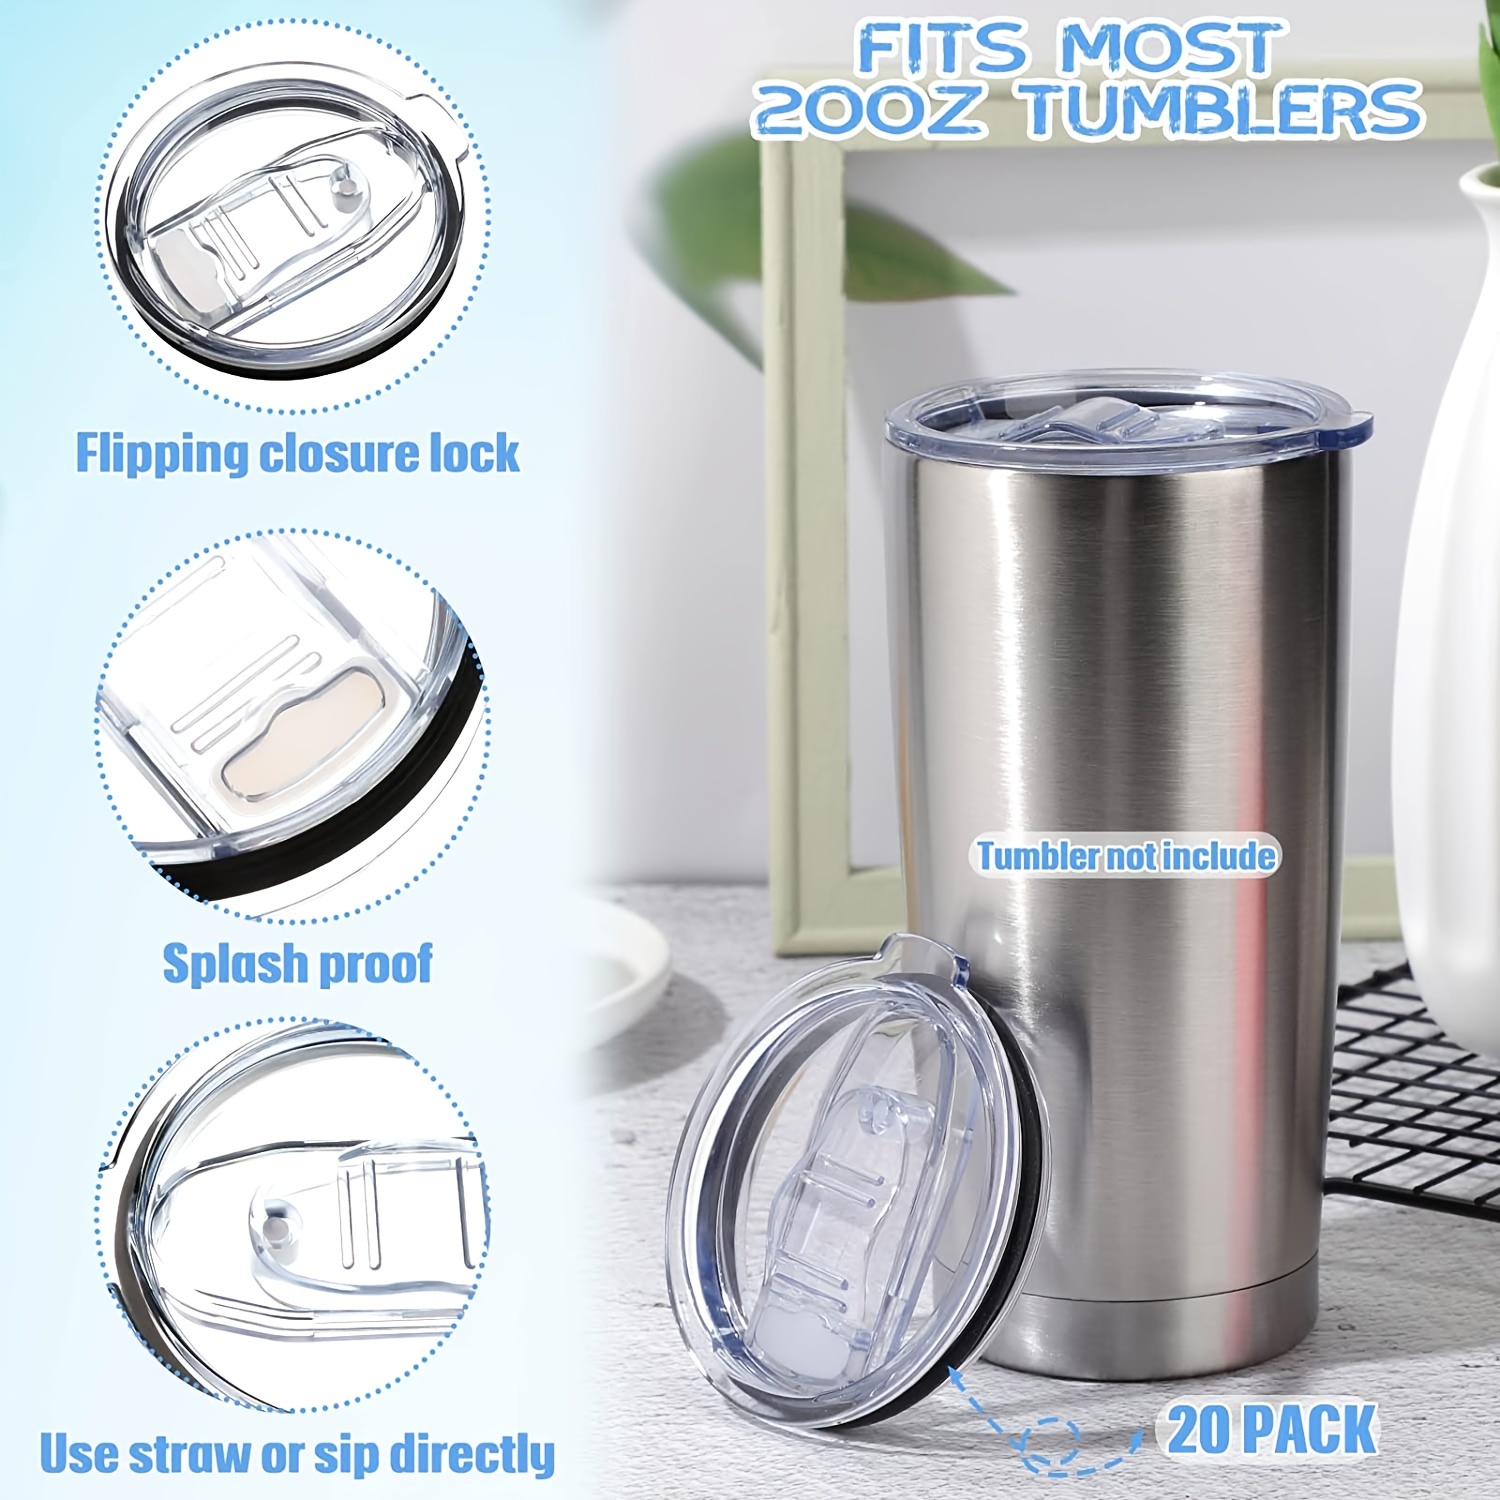 JUMBO FILTER 2 Pack Tumbler Replacement Lids for 20 oz Tumblers with 3 Pcs  Magnetic Spill Proof Slider, Spill Proof Splash Resistant Lids Covers Fit